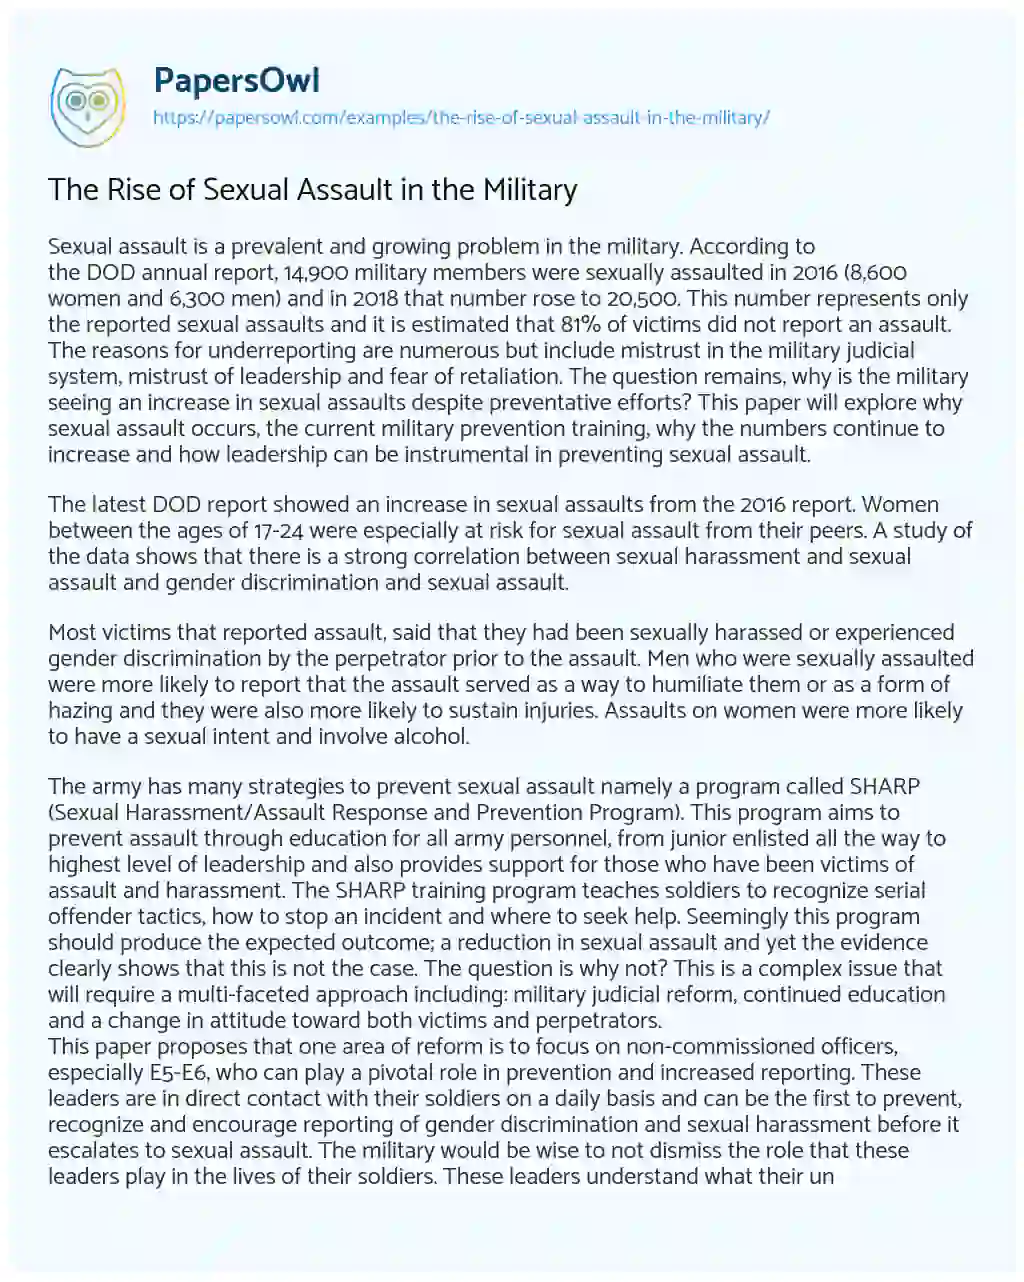 Essay on The Rise of Sexual Assault in the Military